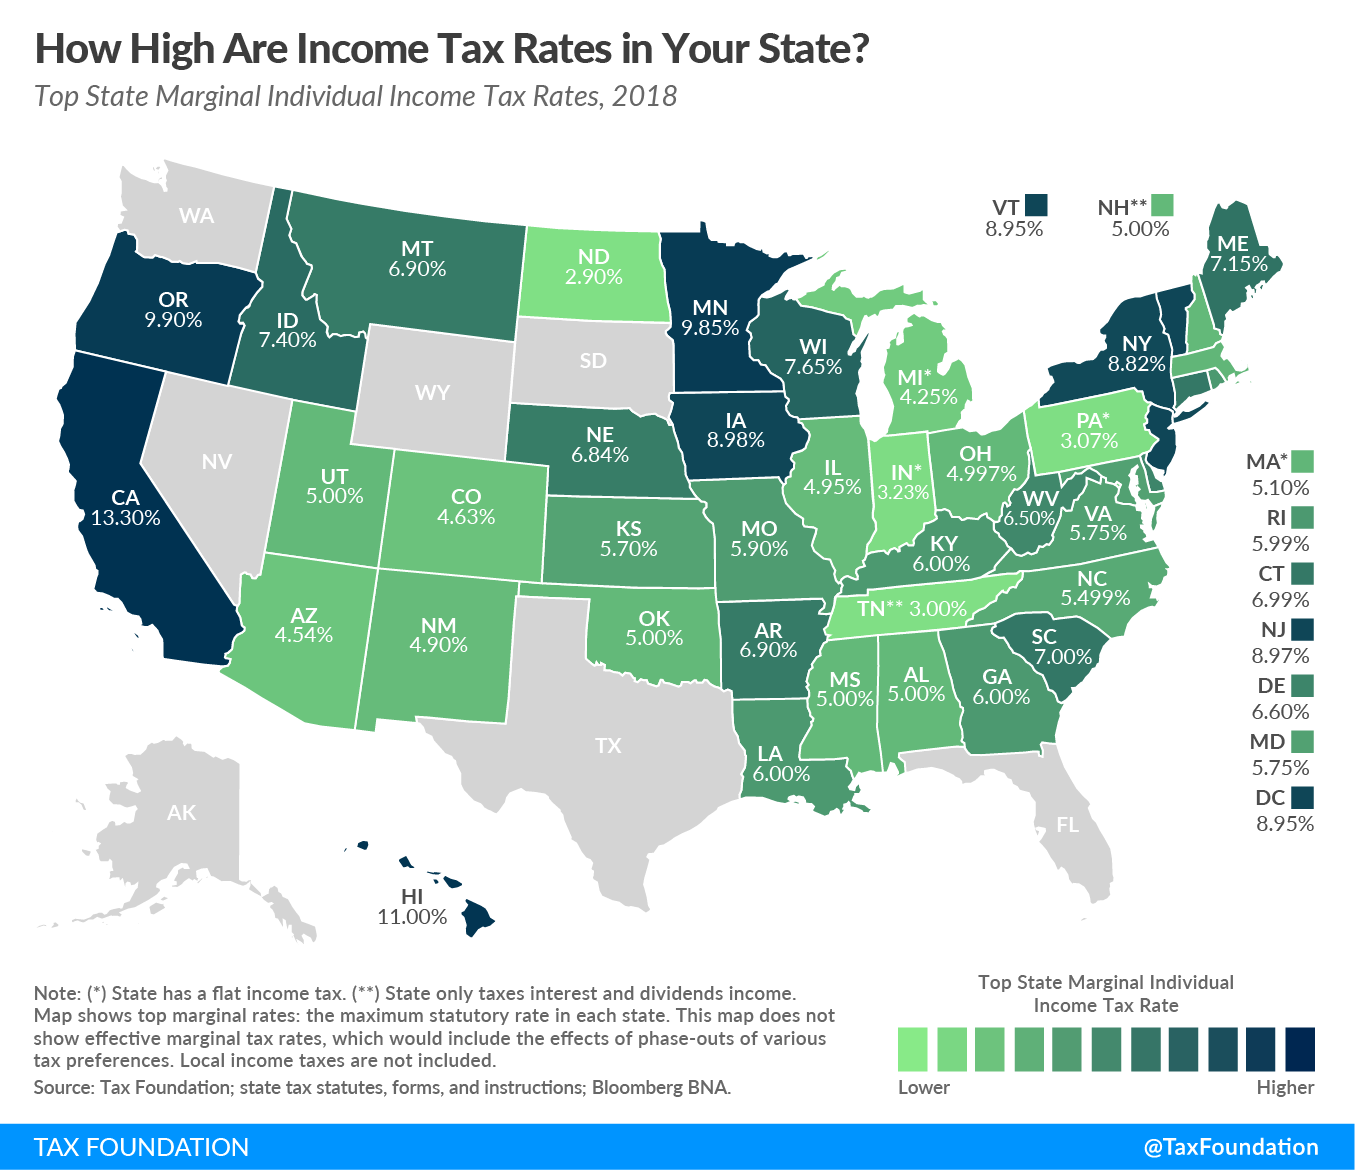 Top State Marginal Individual Income Tax Rates, 2018